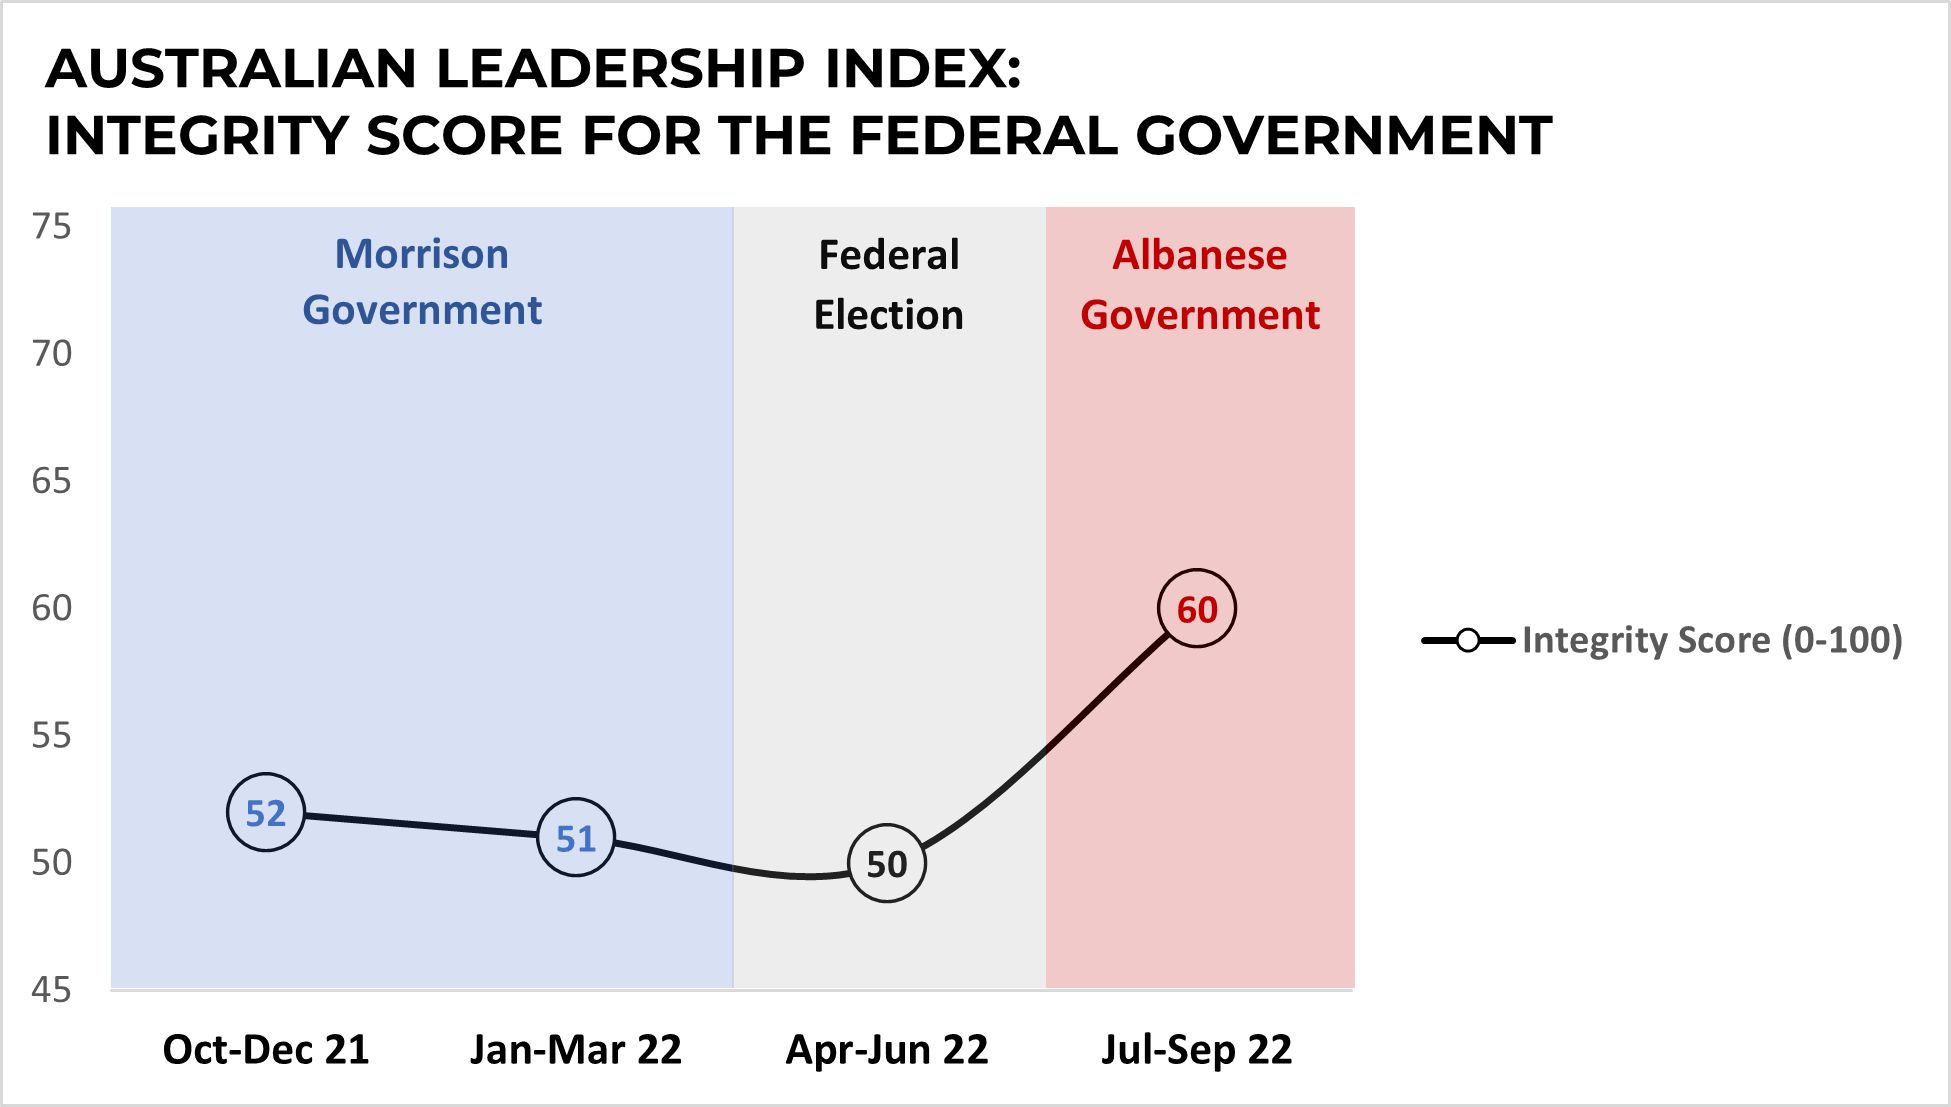 A graph displaying data from the Australian Leadership Index which shows the integrity score for the Federal Government